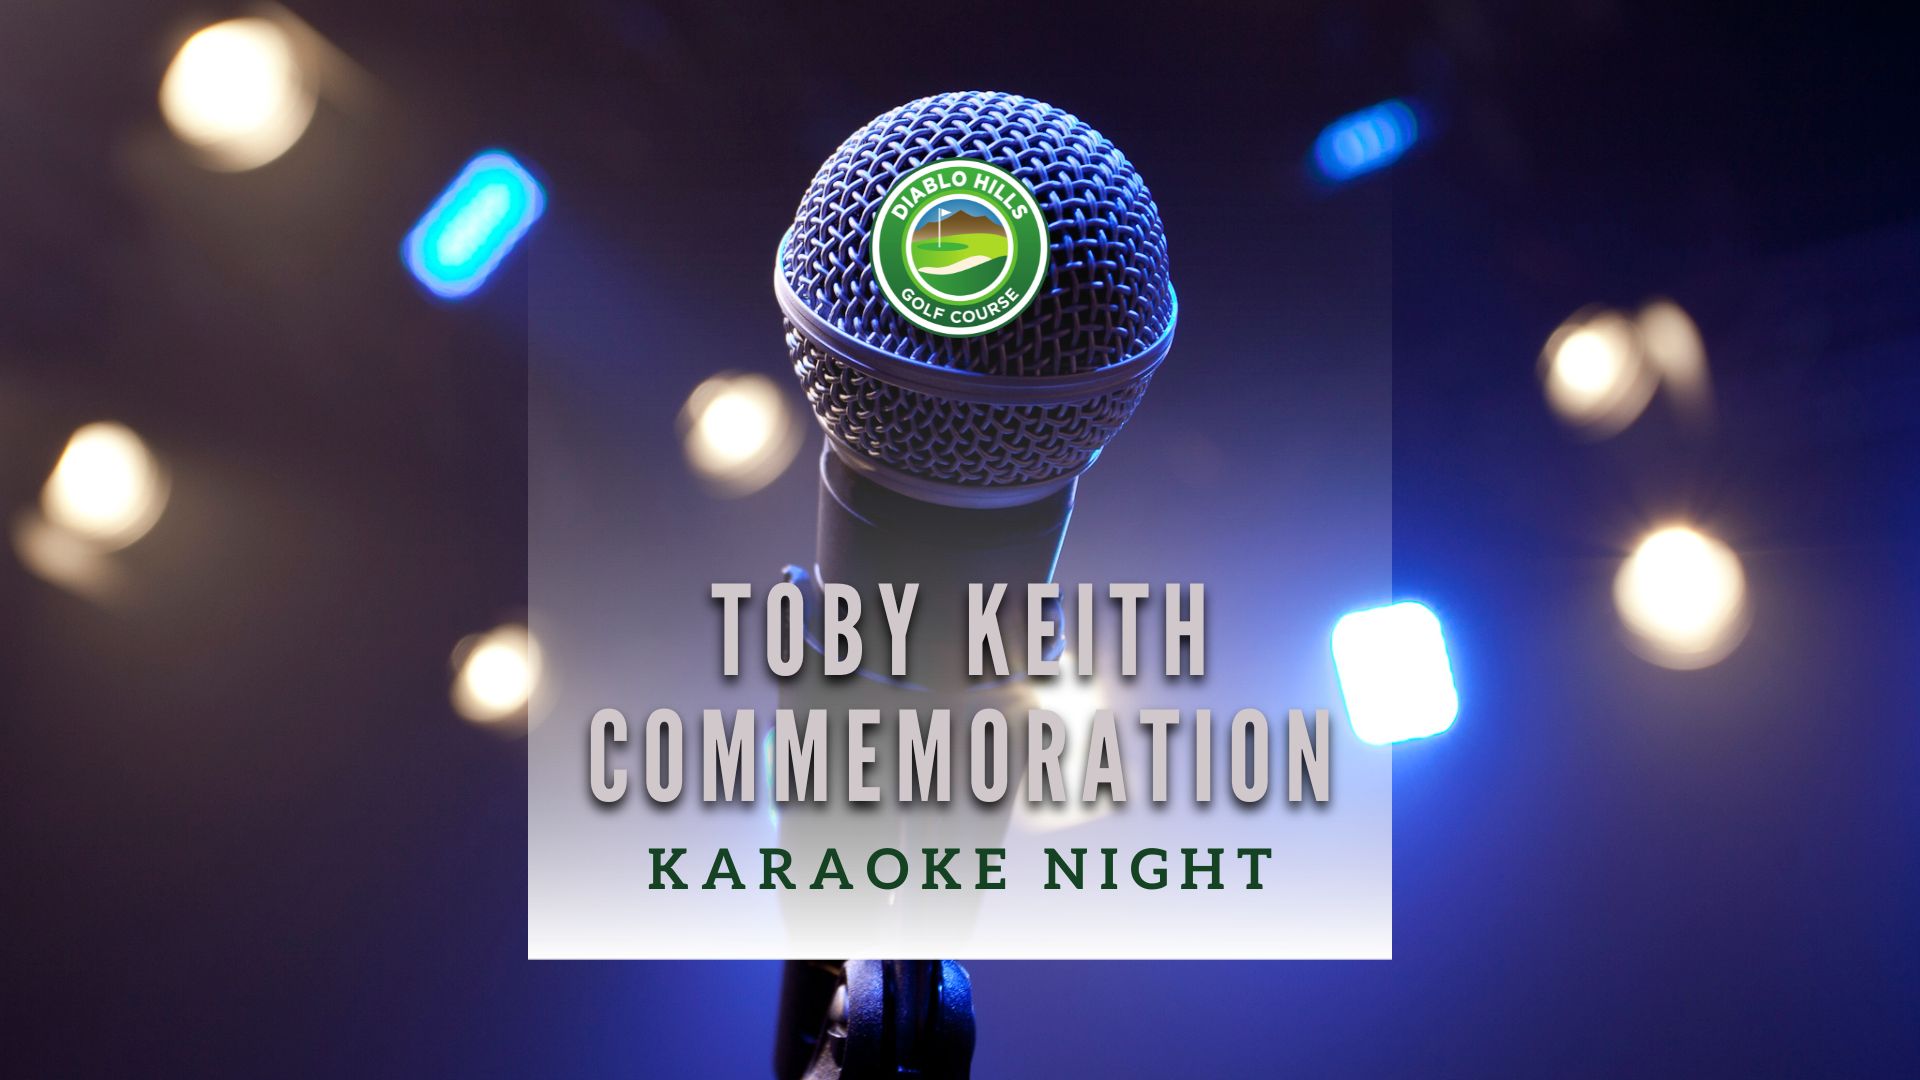 Toby Keith Commemoration